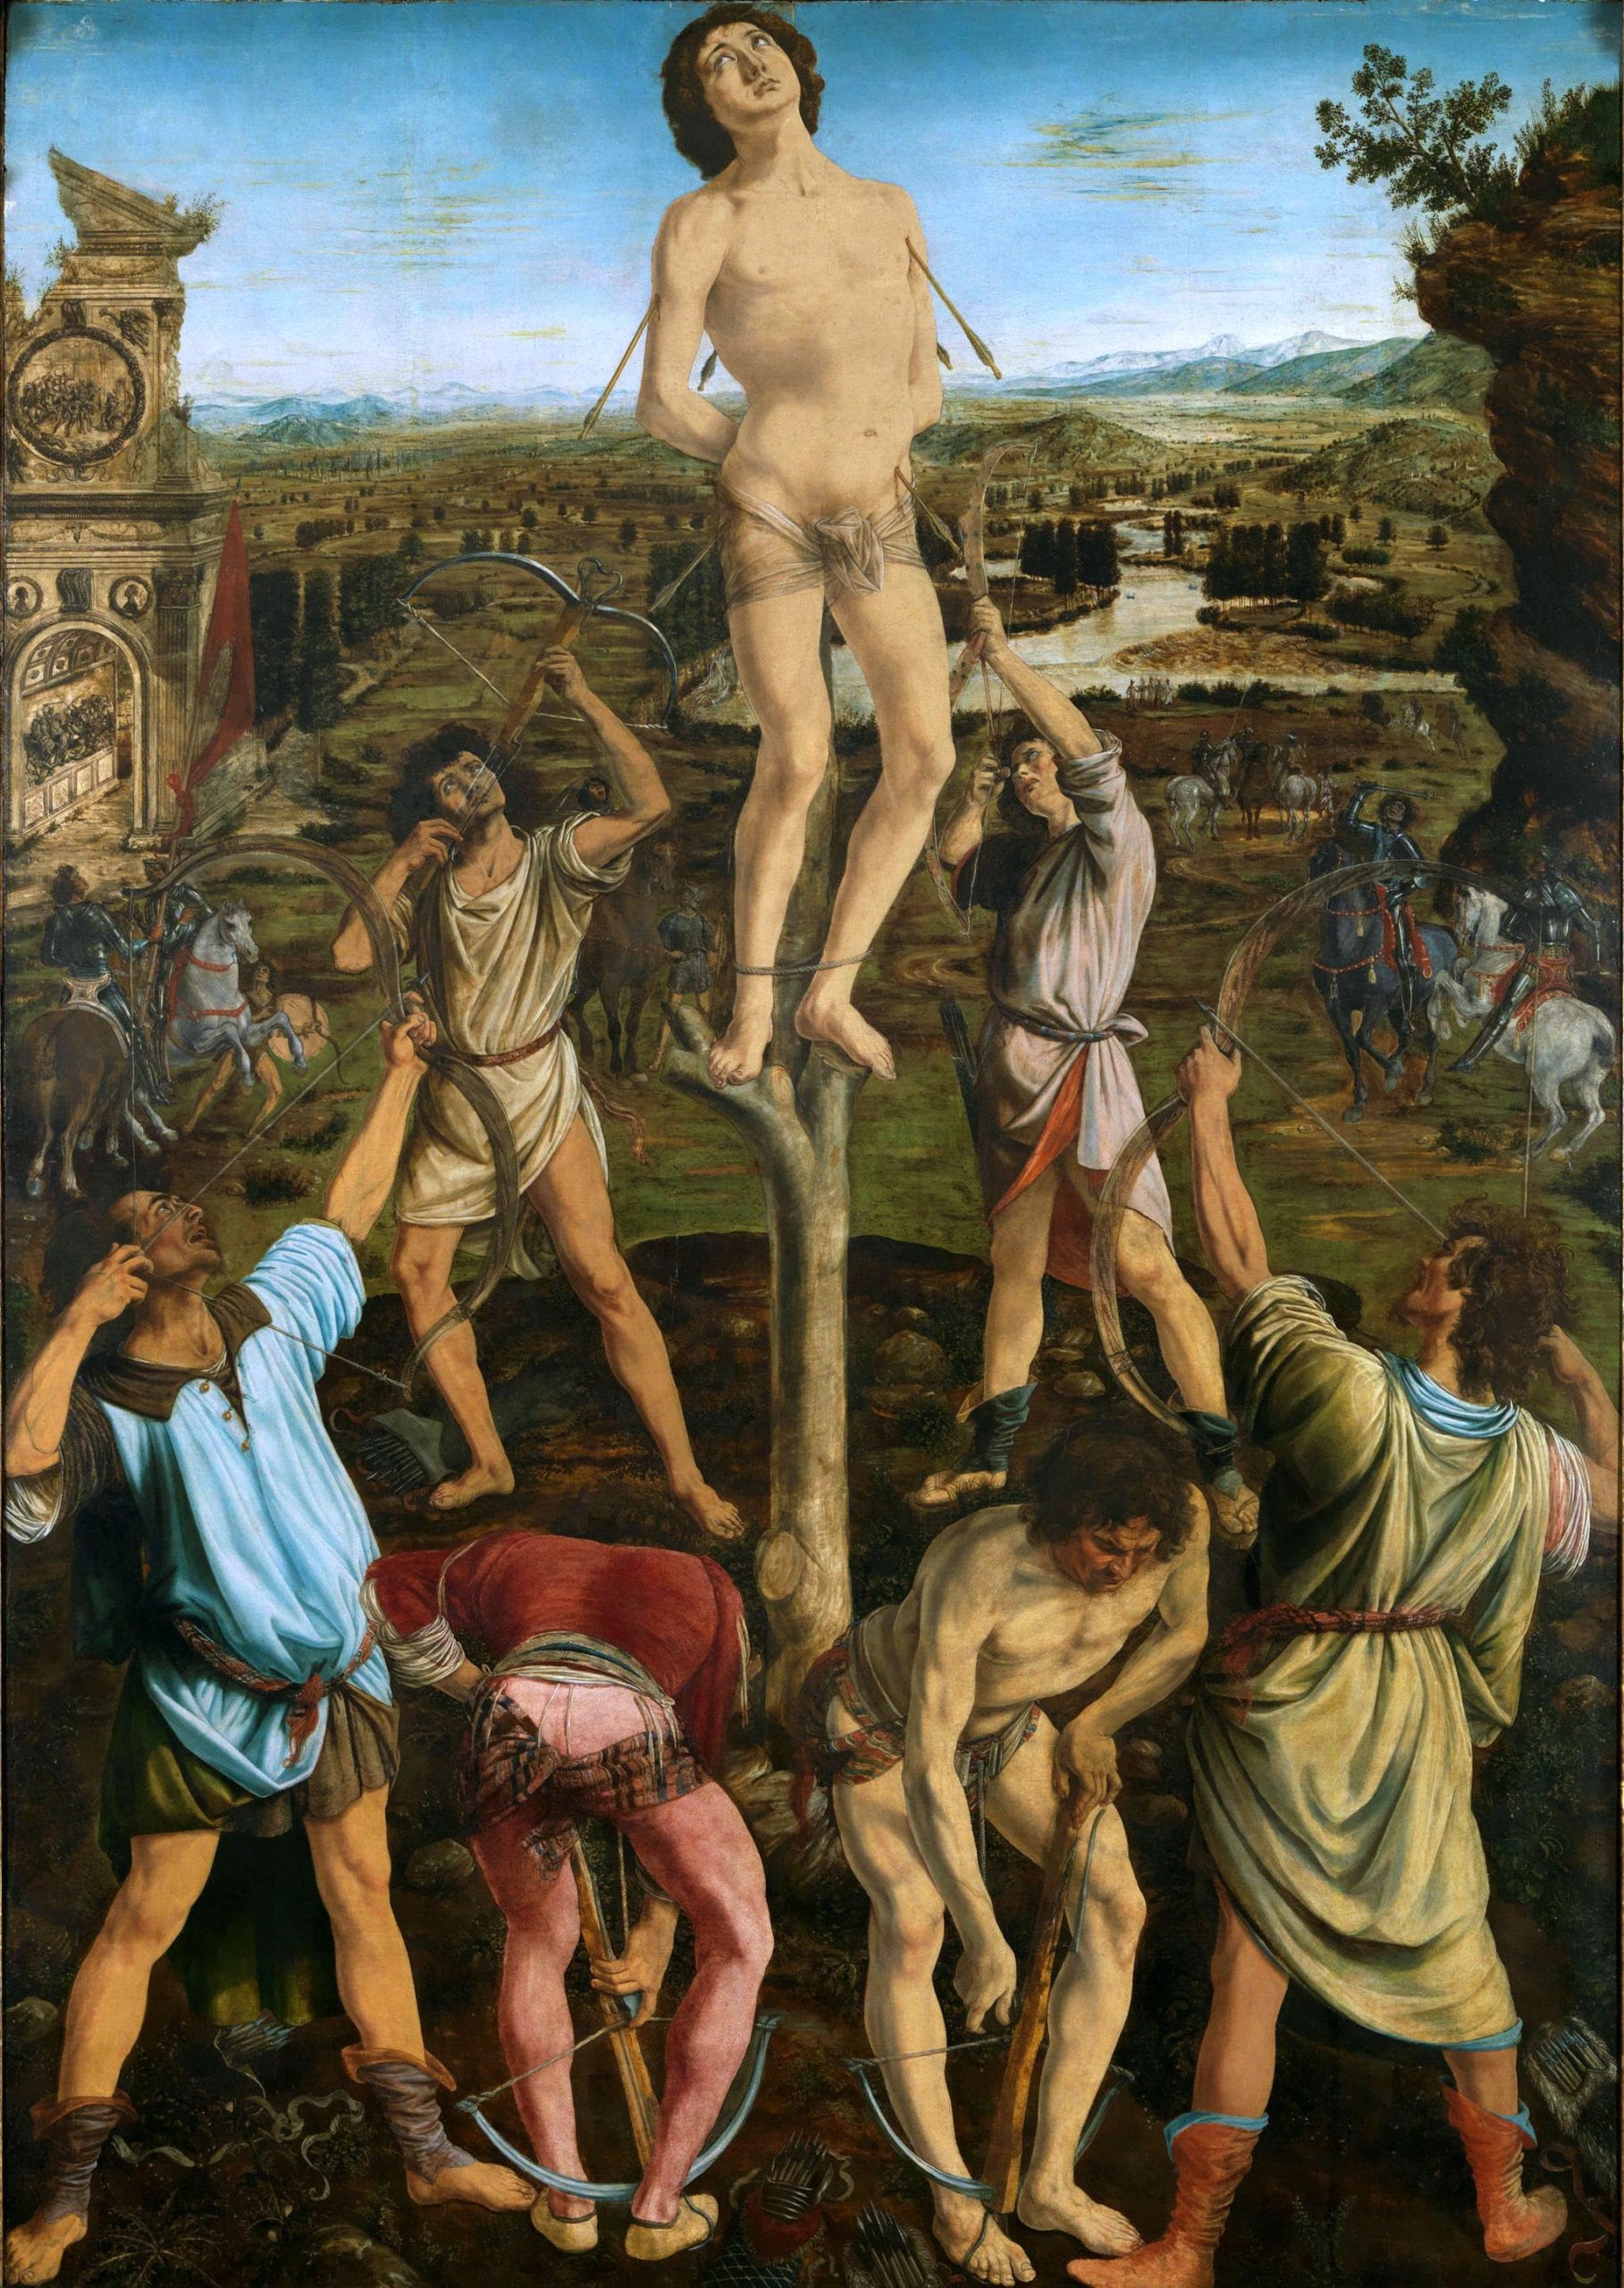 Saint Sebastian, from Antonio Pollaiuolo, in the air, soldiers focusing arrows on him